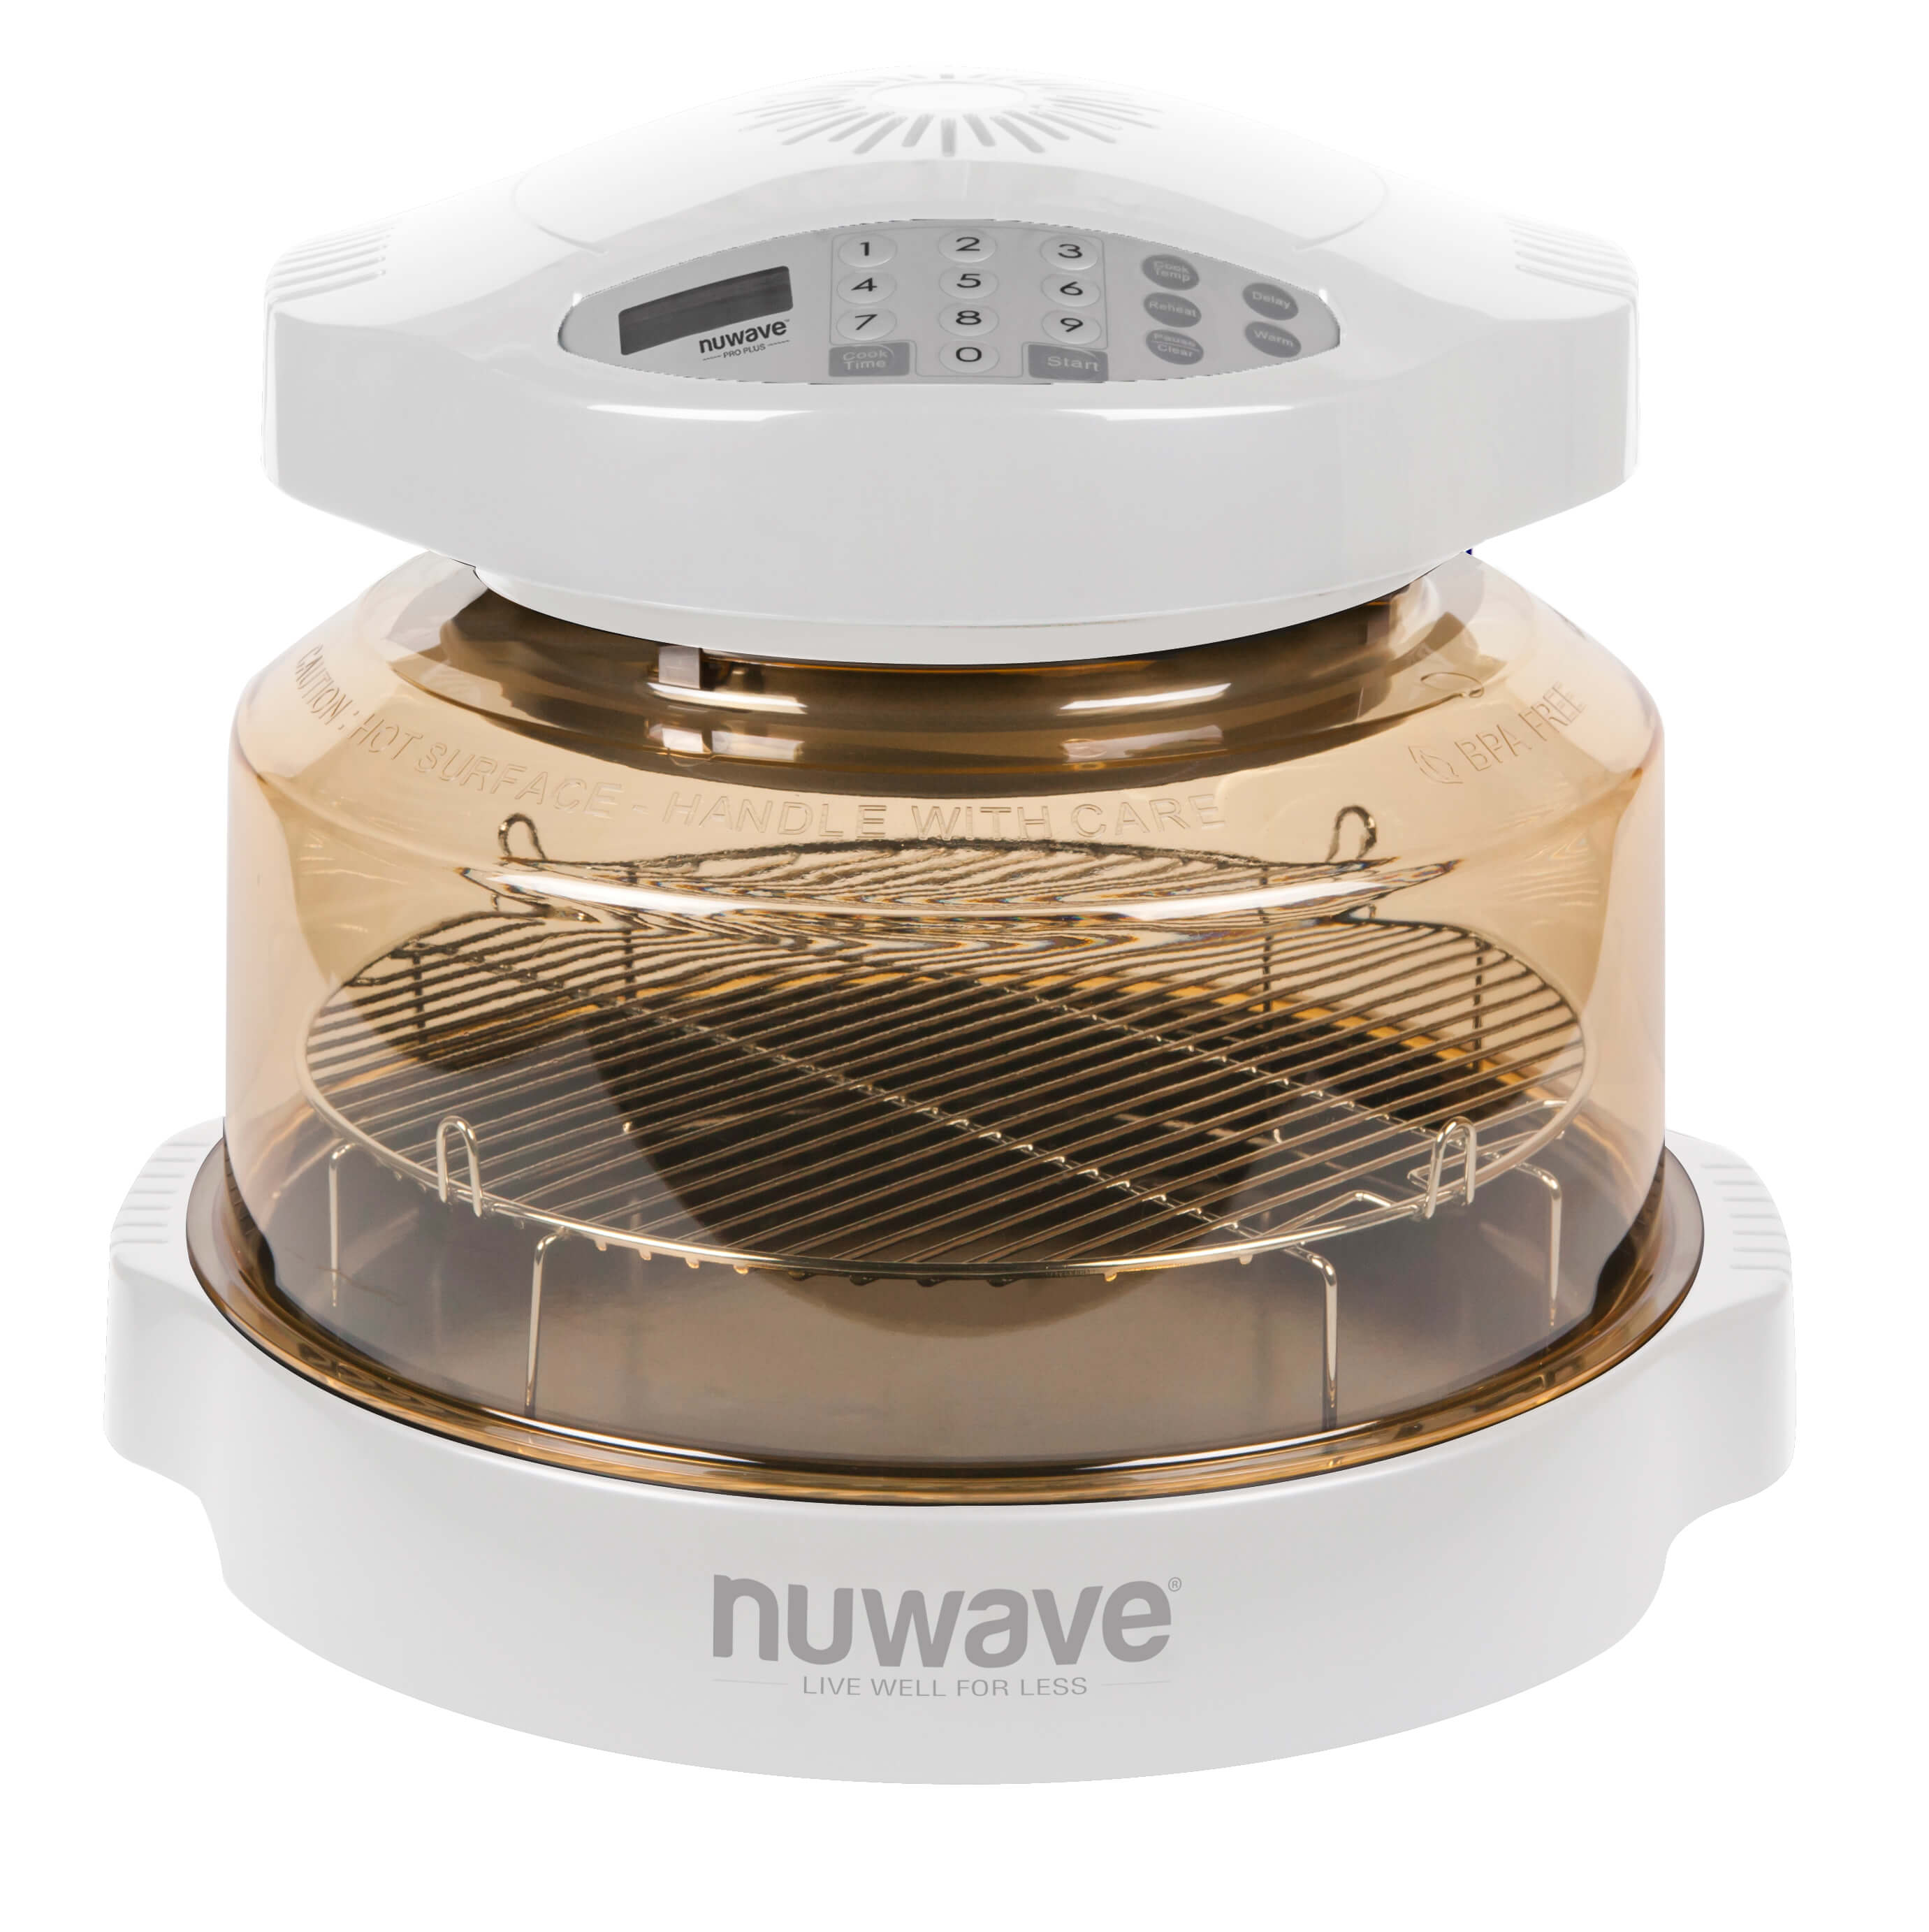 Nuwave Oven Cooking Chart